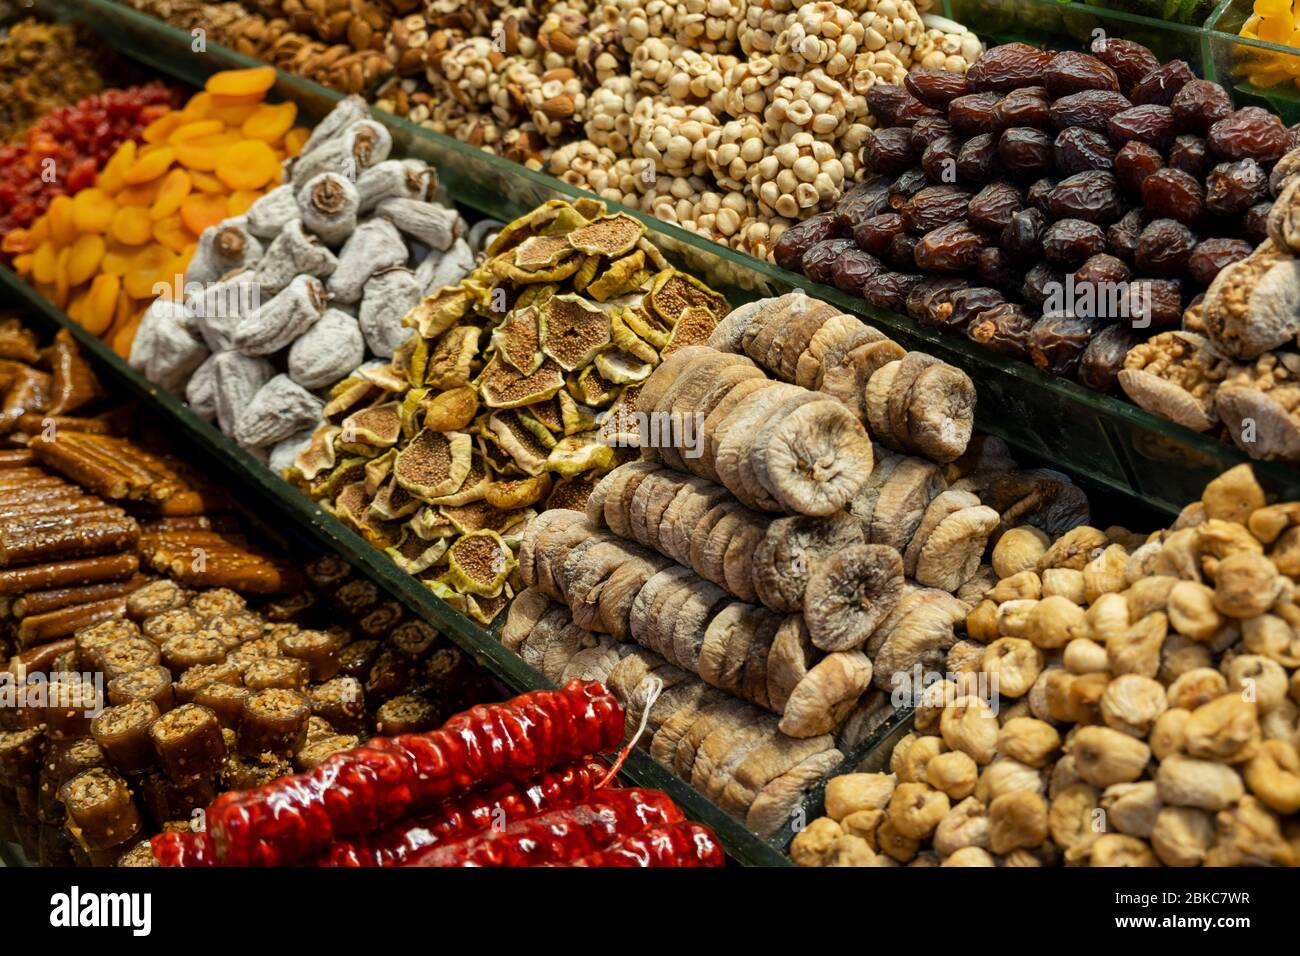 Turkish delight and snacks in spice bazaar in Istanbul. Dry fig and date fruit, apricot, hazelnut. Stock Photo